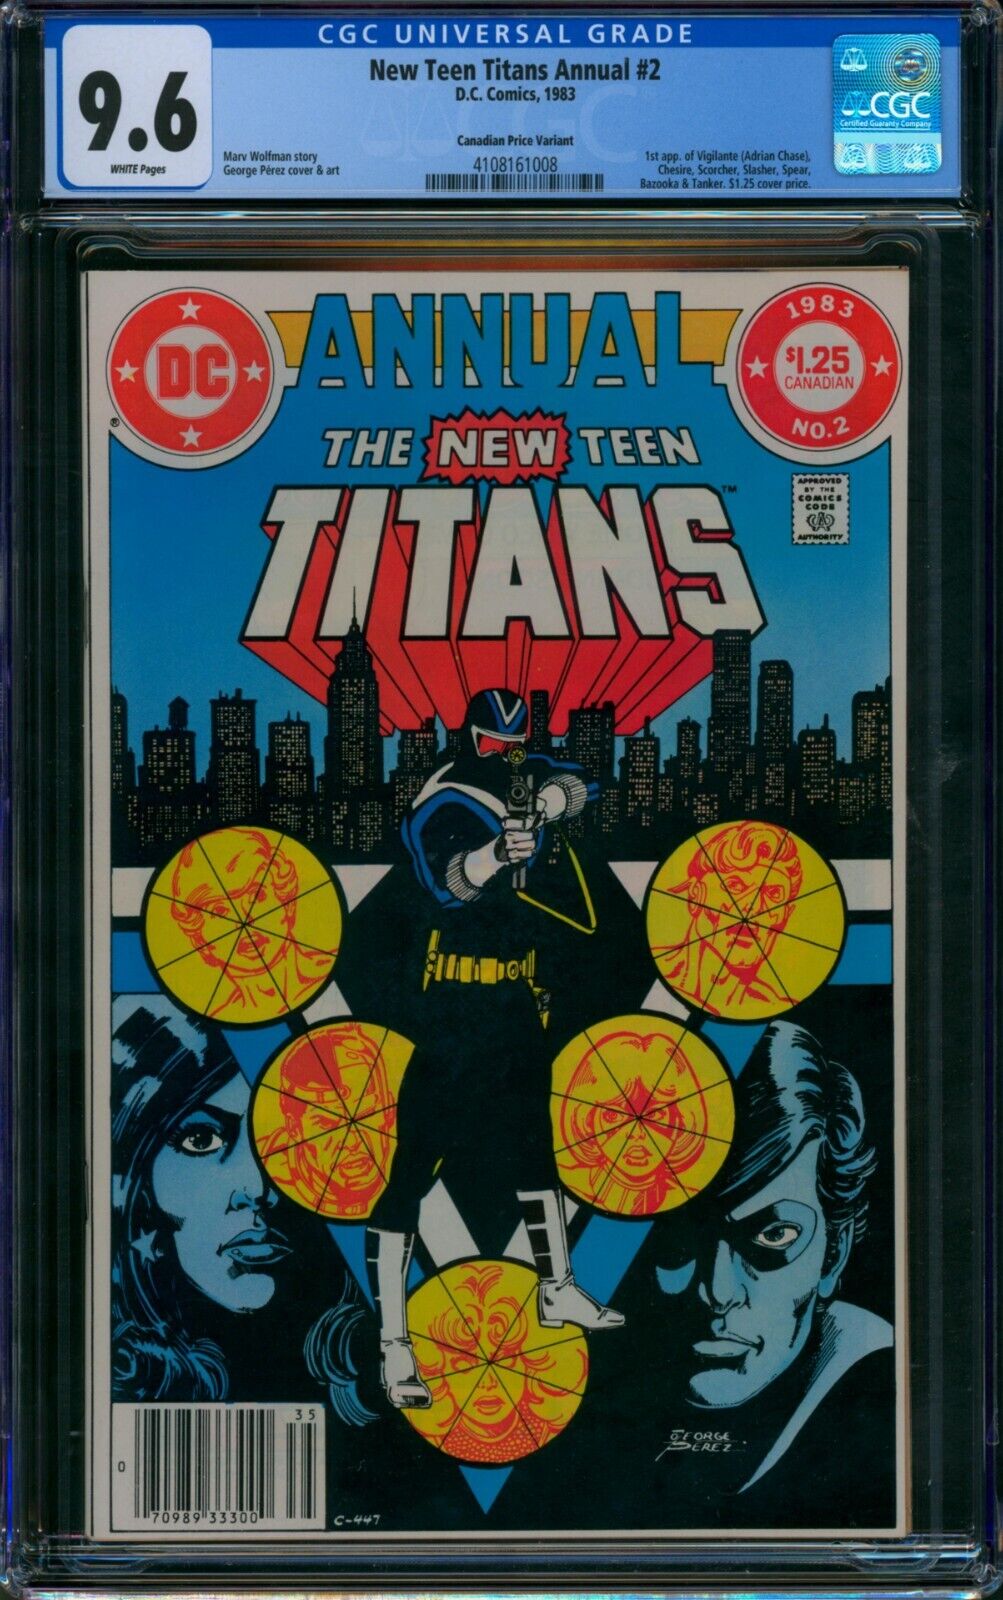 New Teen Titans Annual #2 🌟 $1.25 CANADIAN PRICE VARIANT 🌟 CGC 9.6 DC 1983